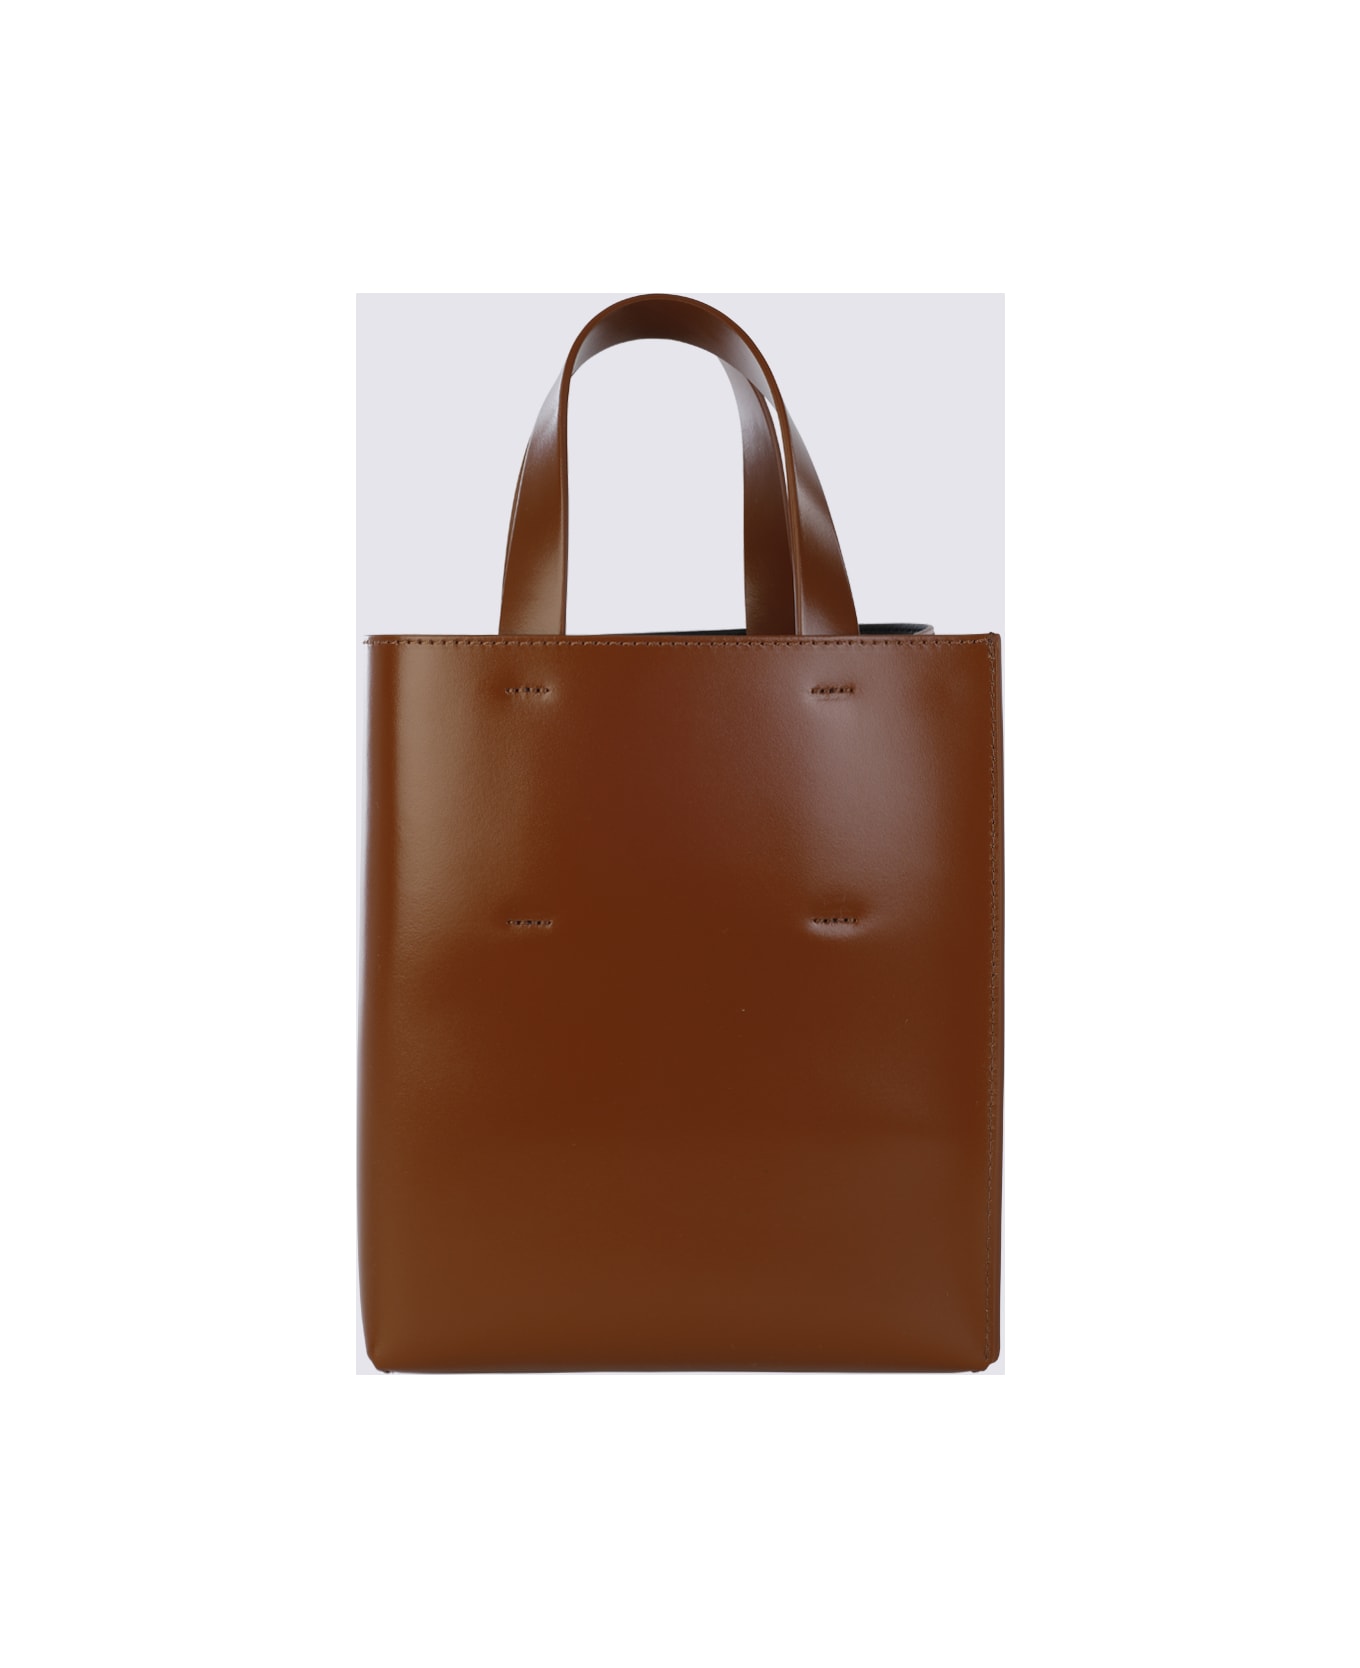 Marni Brown Leather Museo Tote Bag トートバッグ